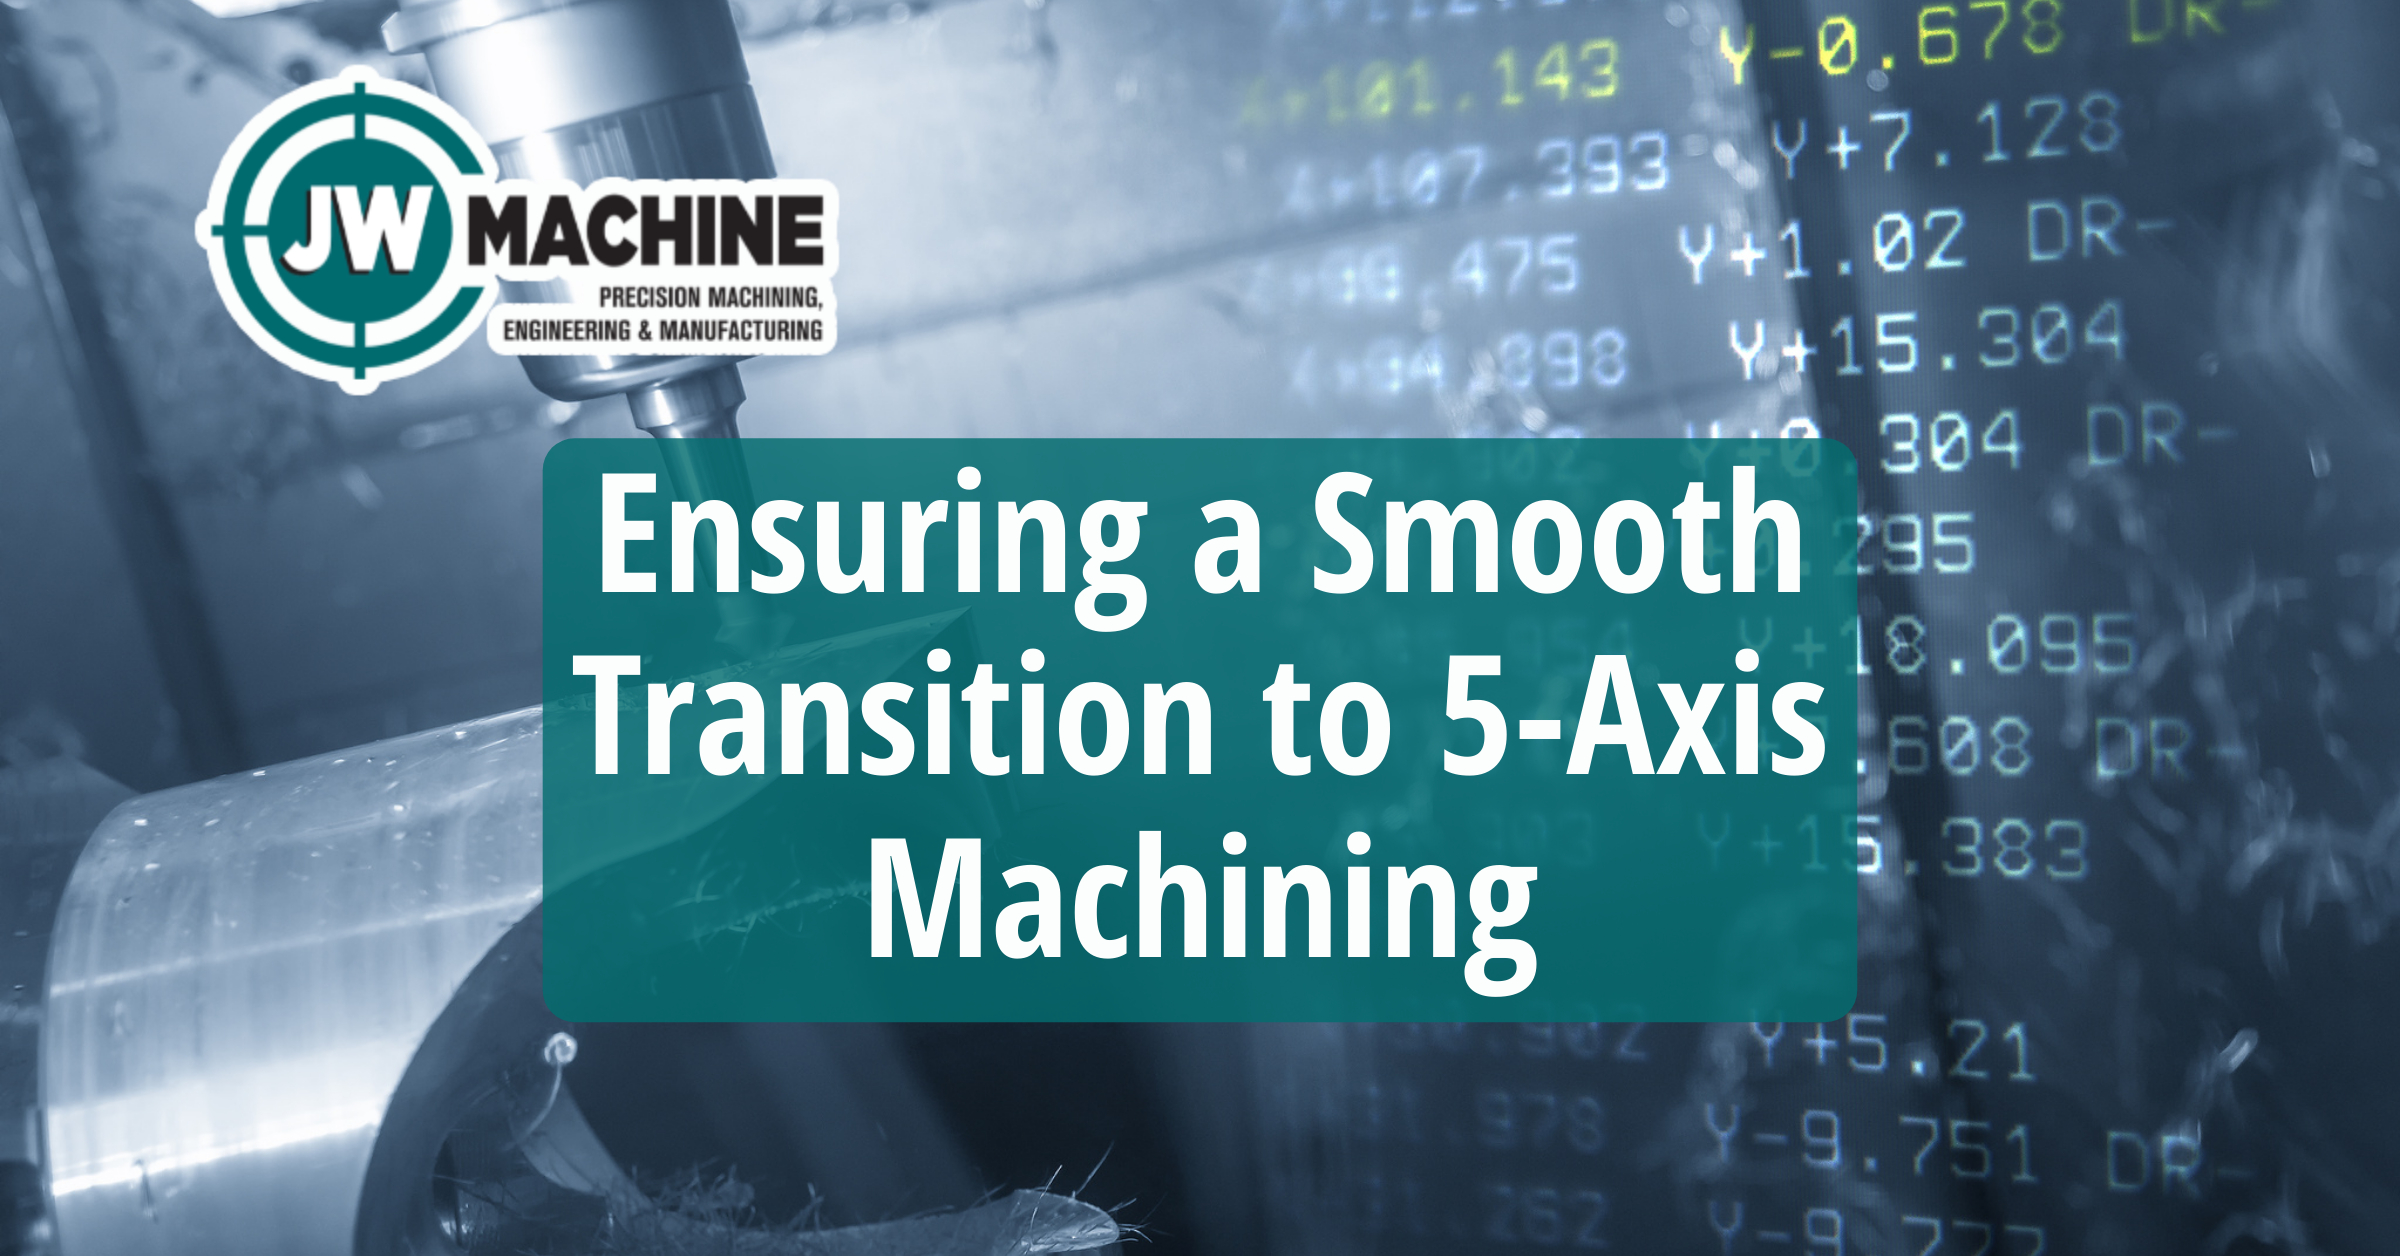 Ensuring a Smooth Transition to 5-Axis Machining